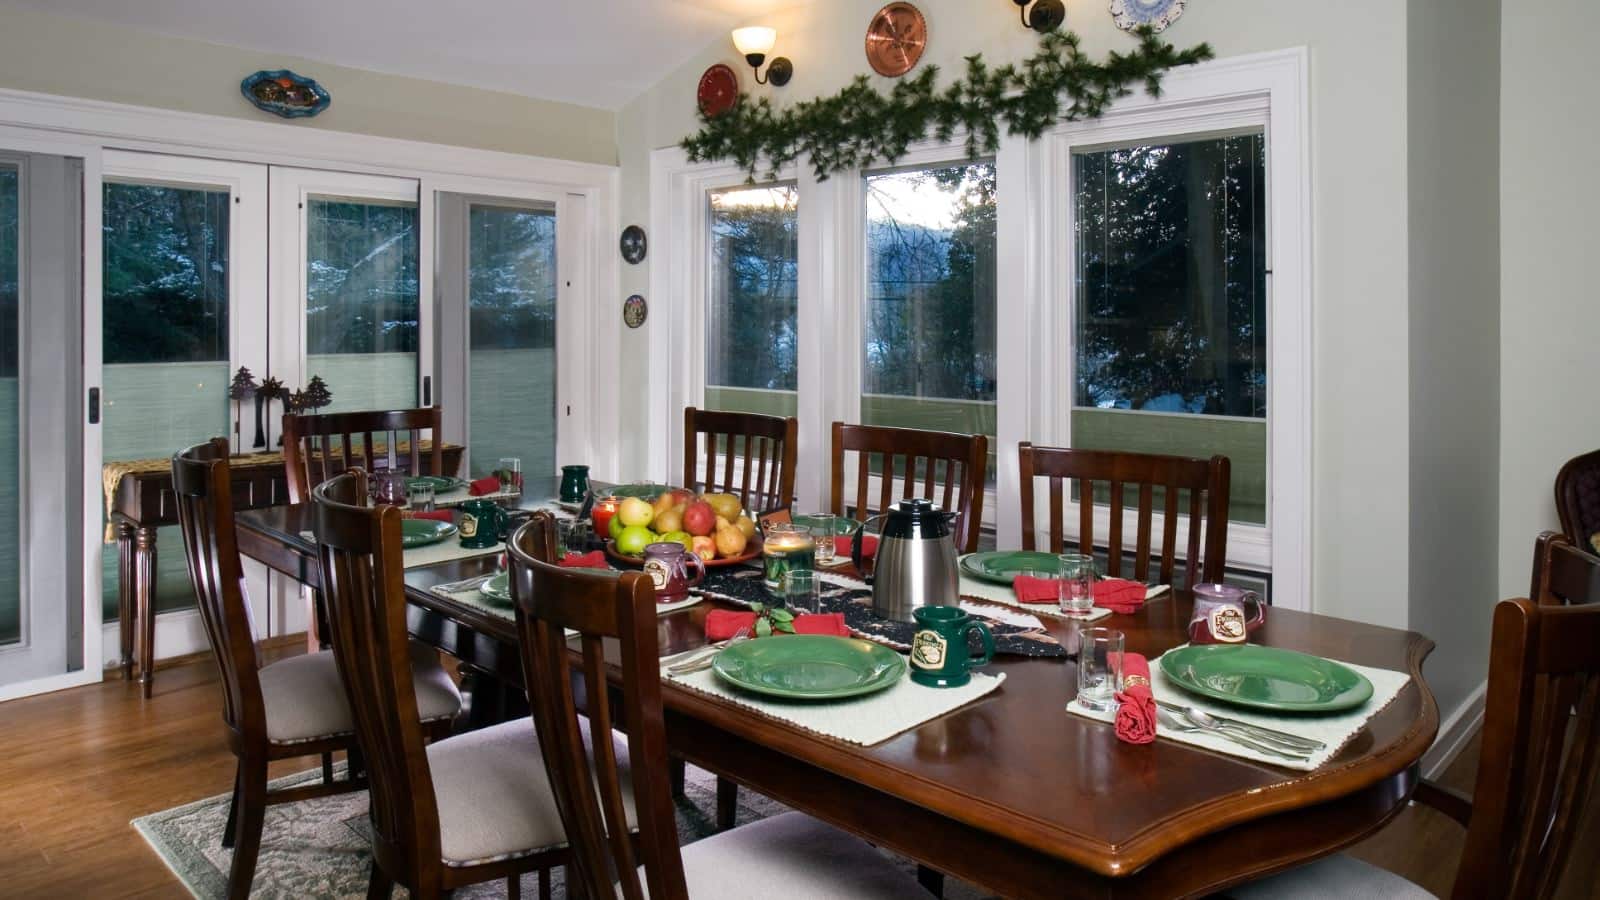 Dining room with long dark wooden table with multiple place settings, wooden chairs, and many windows with views of the outside